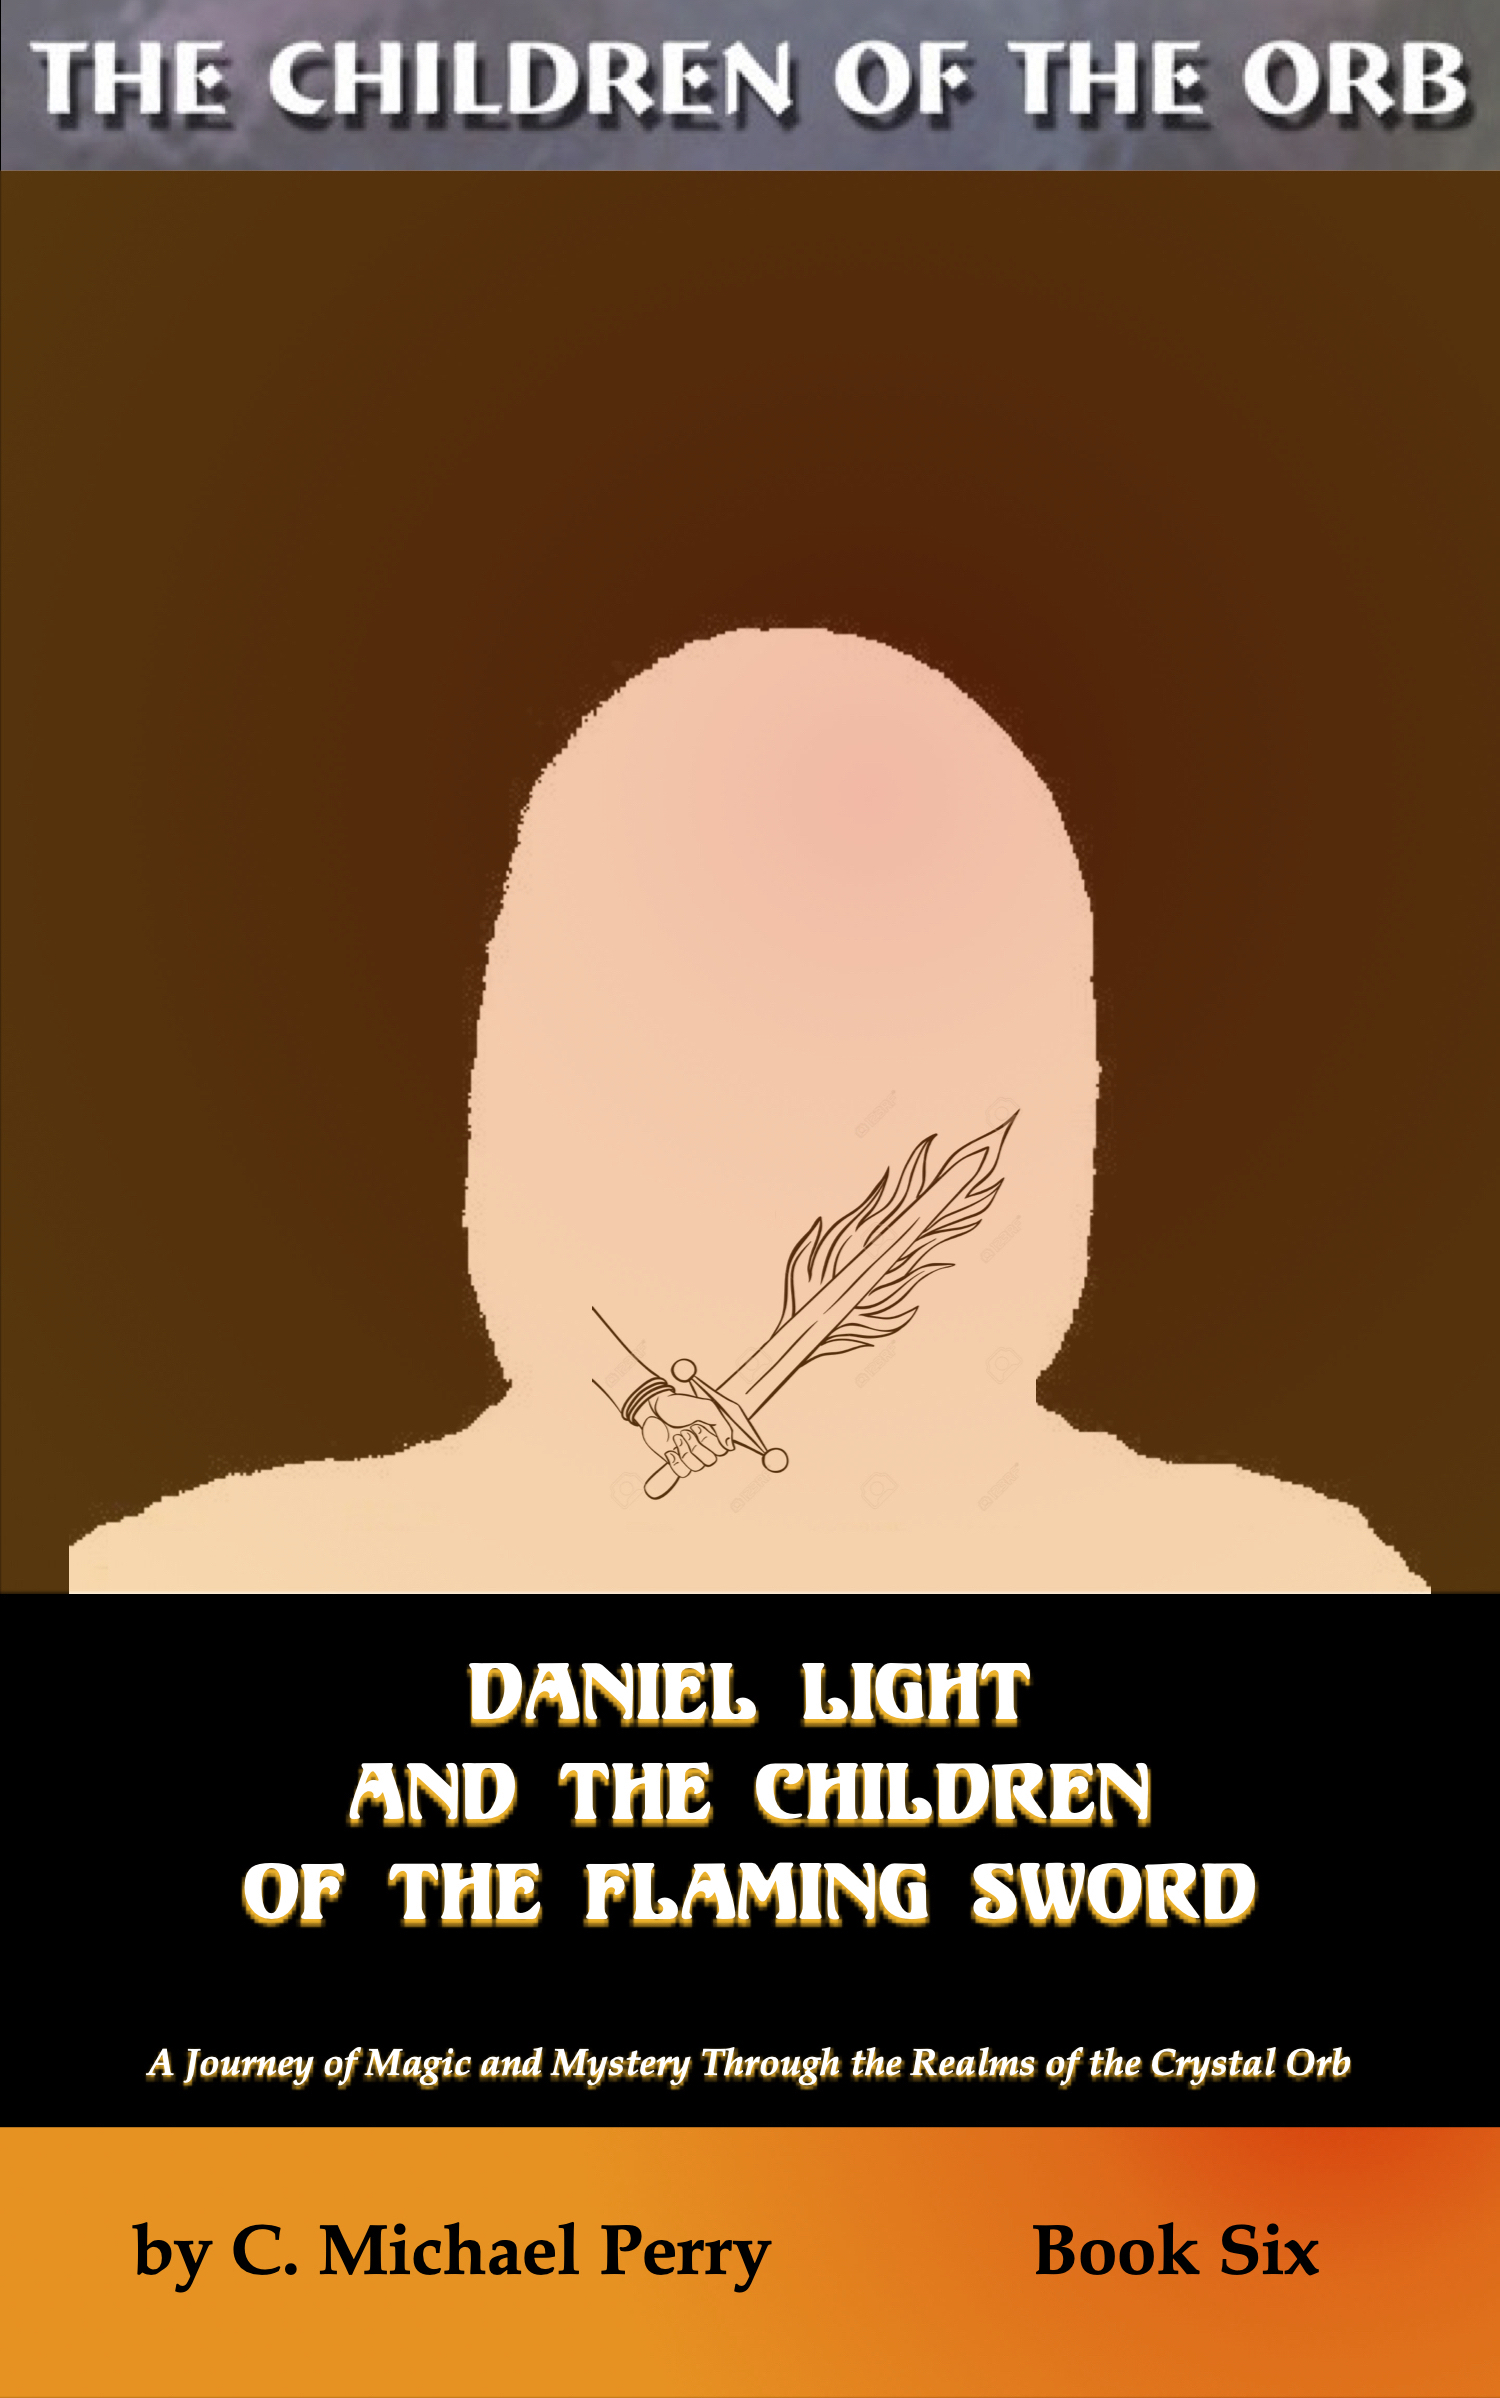 Daniel Light and the Children of the Flaming Sword — Book 6